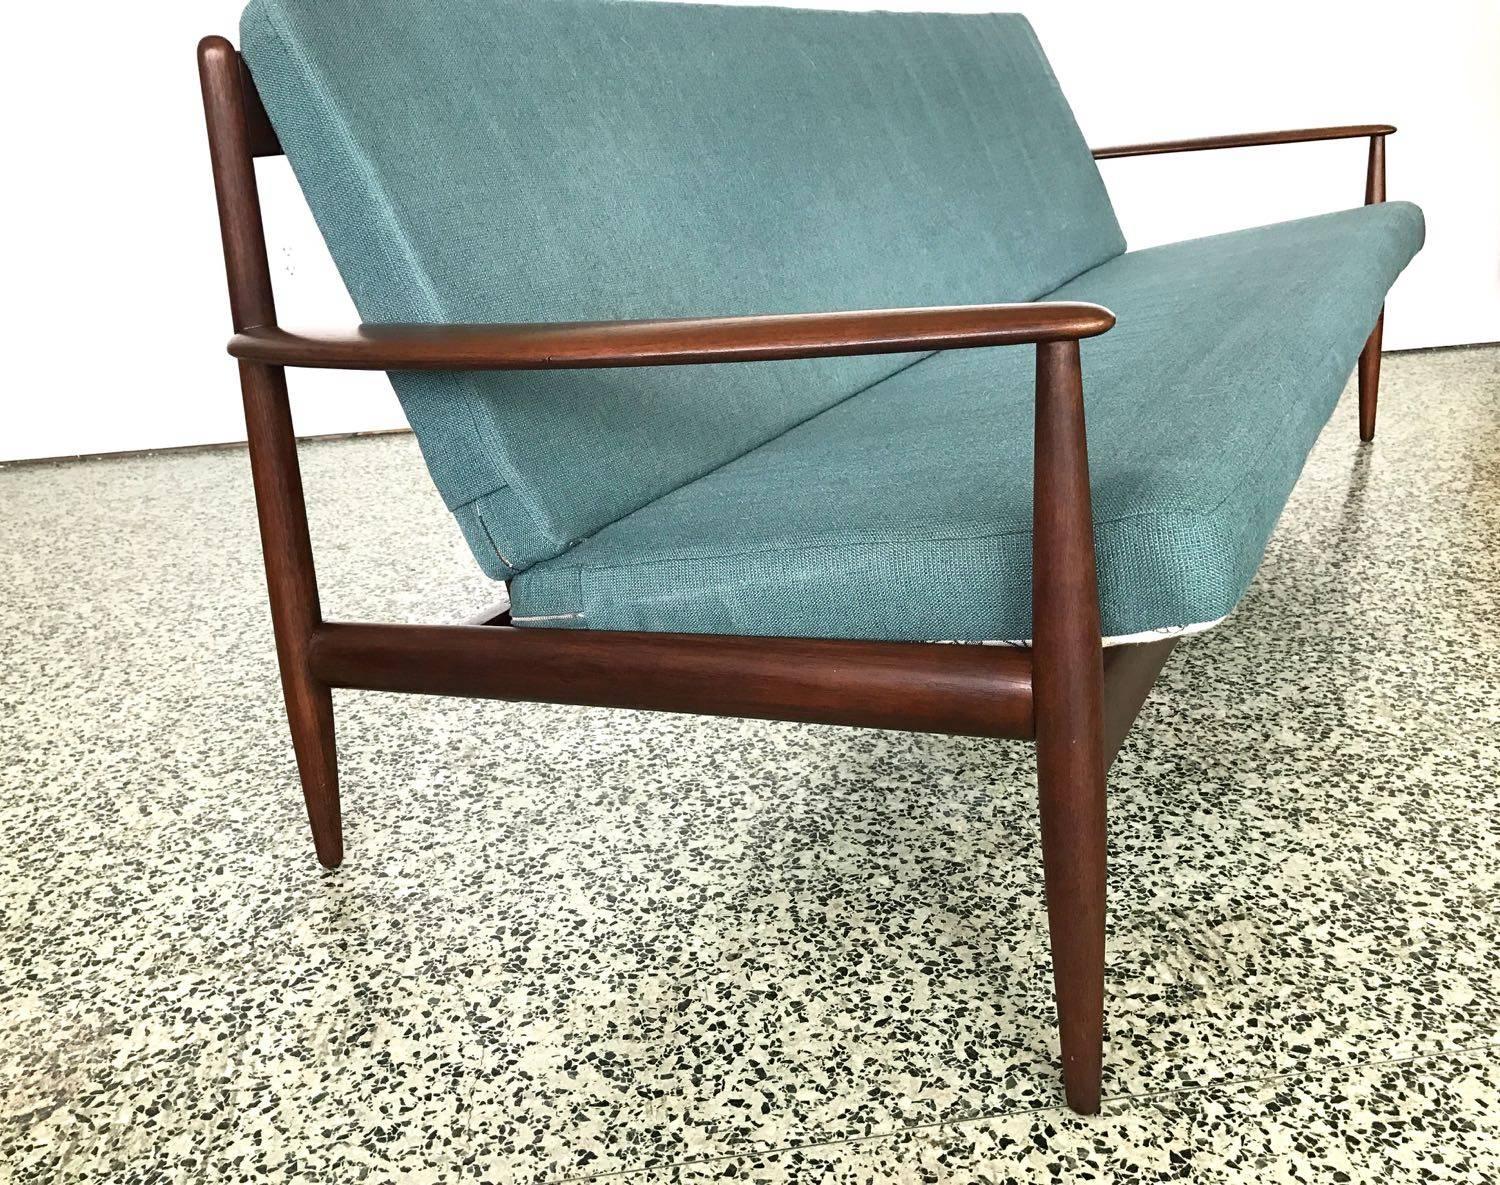 Designer: Grete Jalk
Period/style: Mid-Century Modern
Country: Denmark
Manufacture: Unknown
Date: 1950s

Chair available separately.